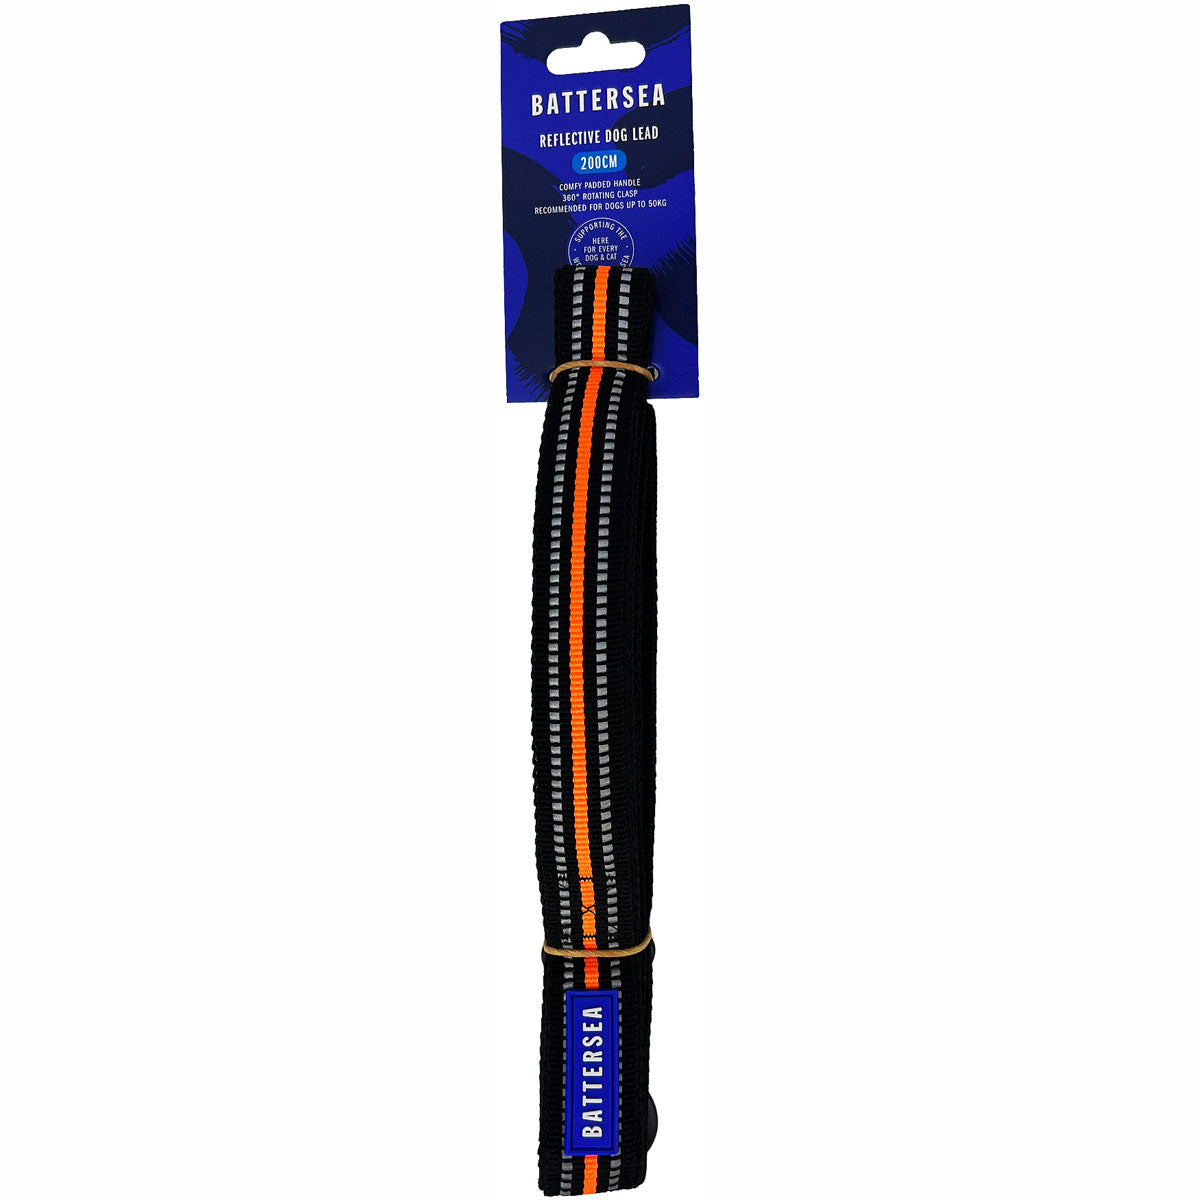 The 200cms Battersea Reflective Dog Lead: Make late-night walks with your pet a safe & enjoyable experience Orange